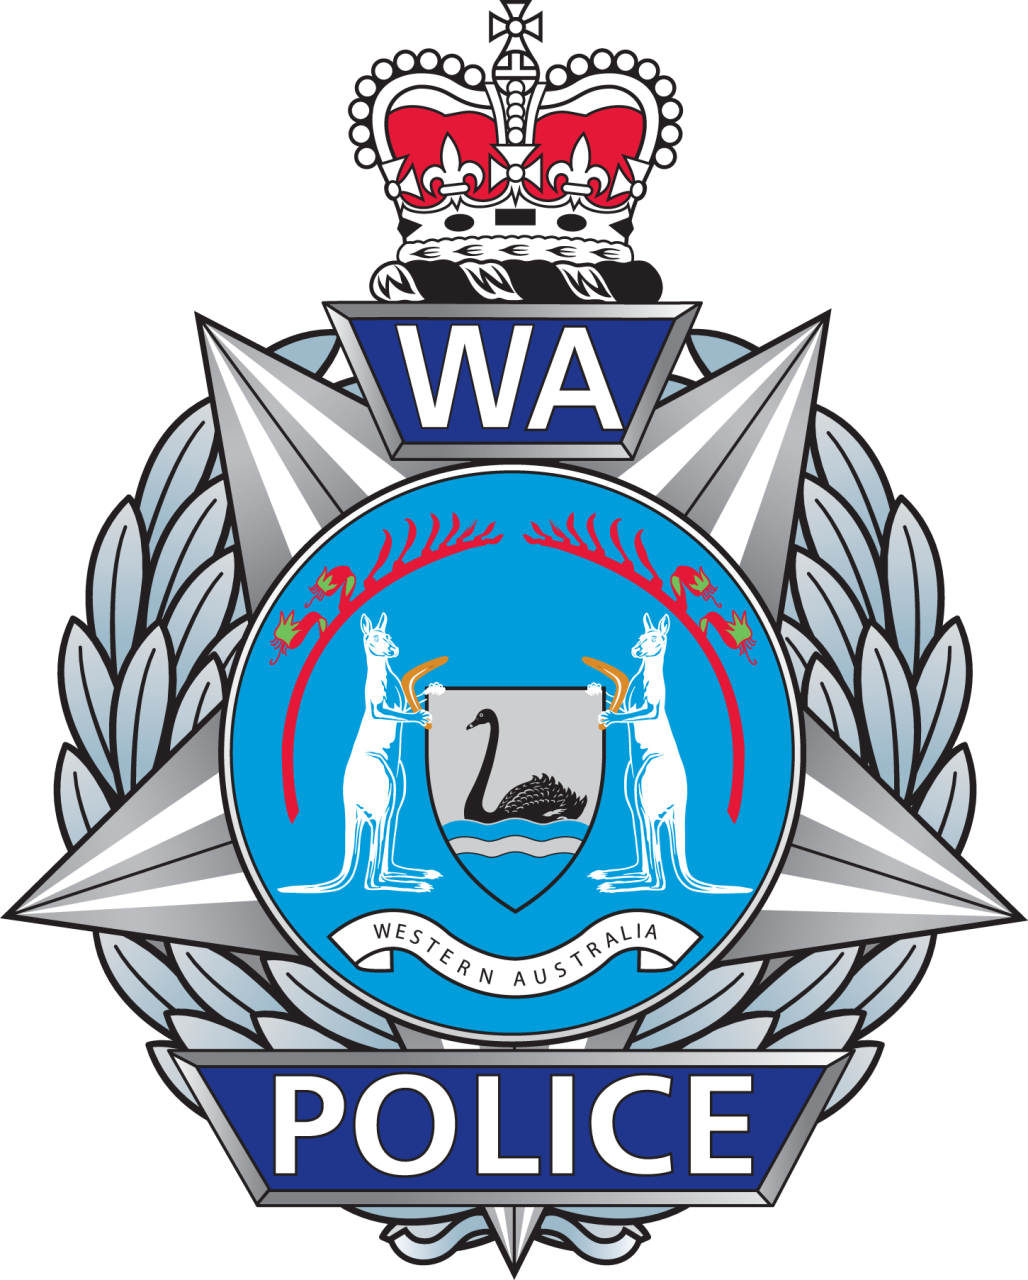 For All Emergencies Call 000 - - Wa Police Force (1028x1280)